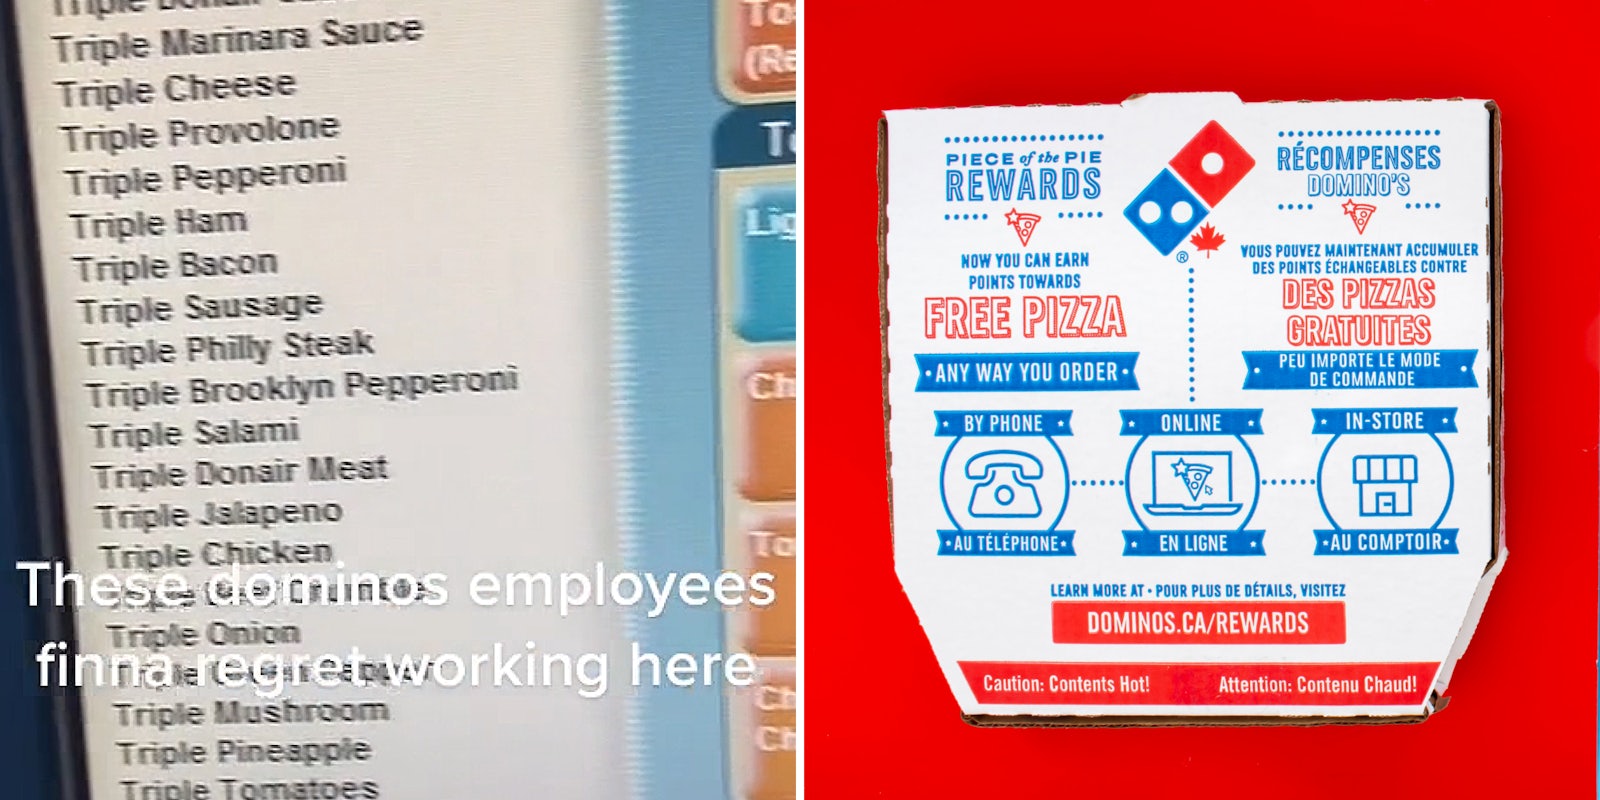 Dominos order screen with list of toppings caption 'These dominos employees finna regret working here' (l) Dominos Pizza box on red background (r)